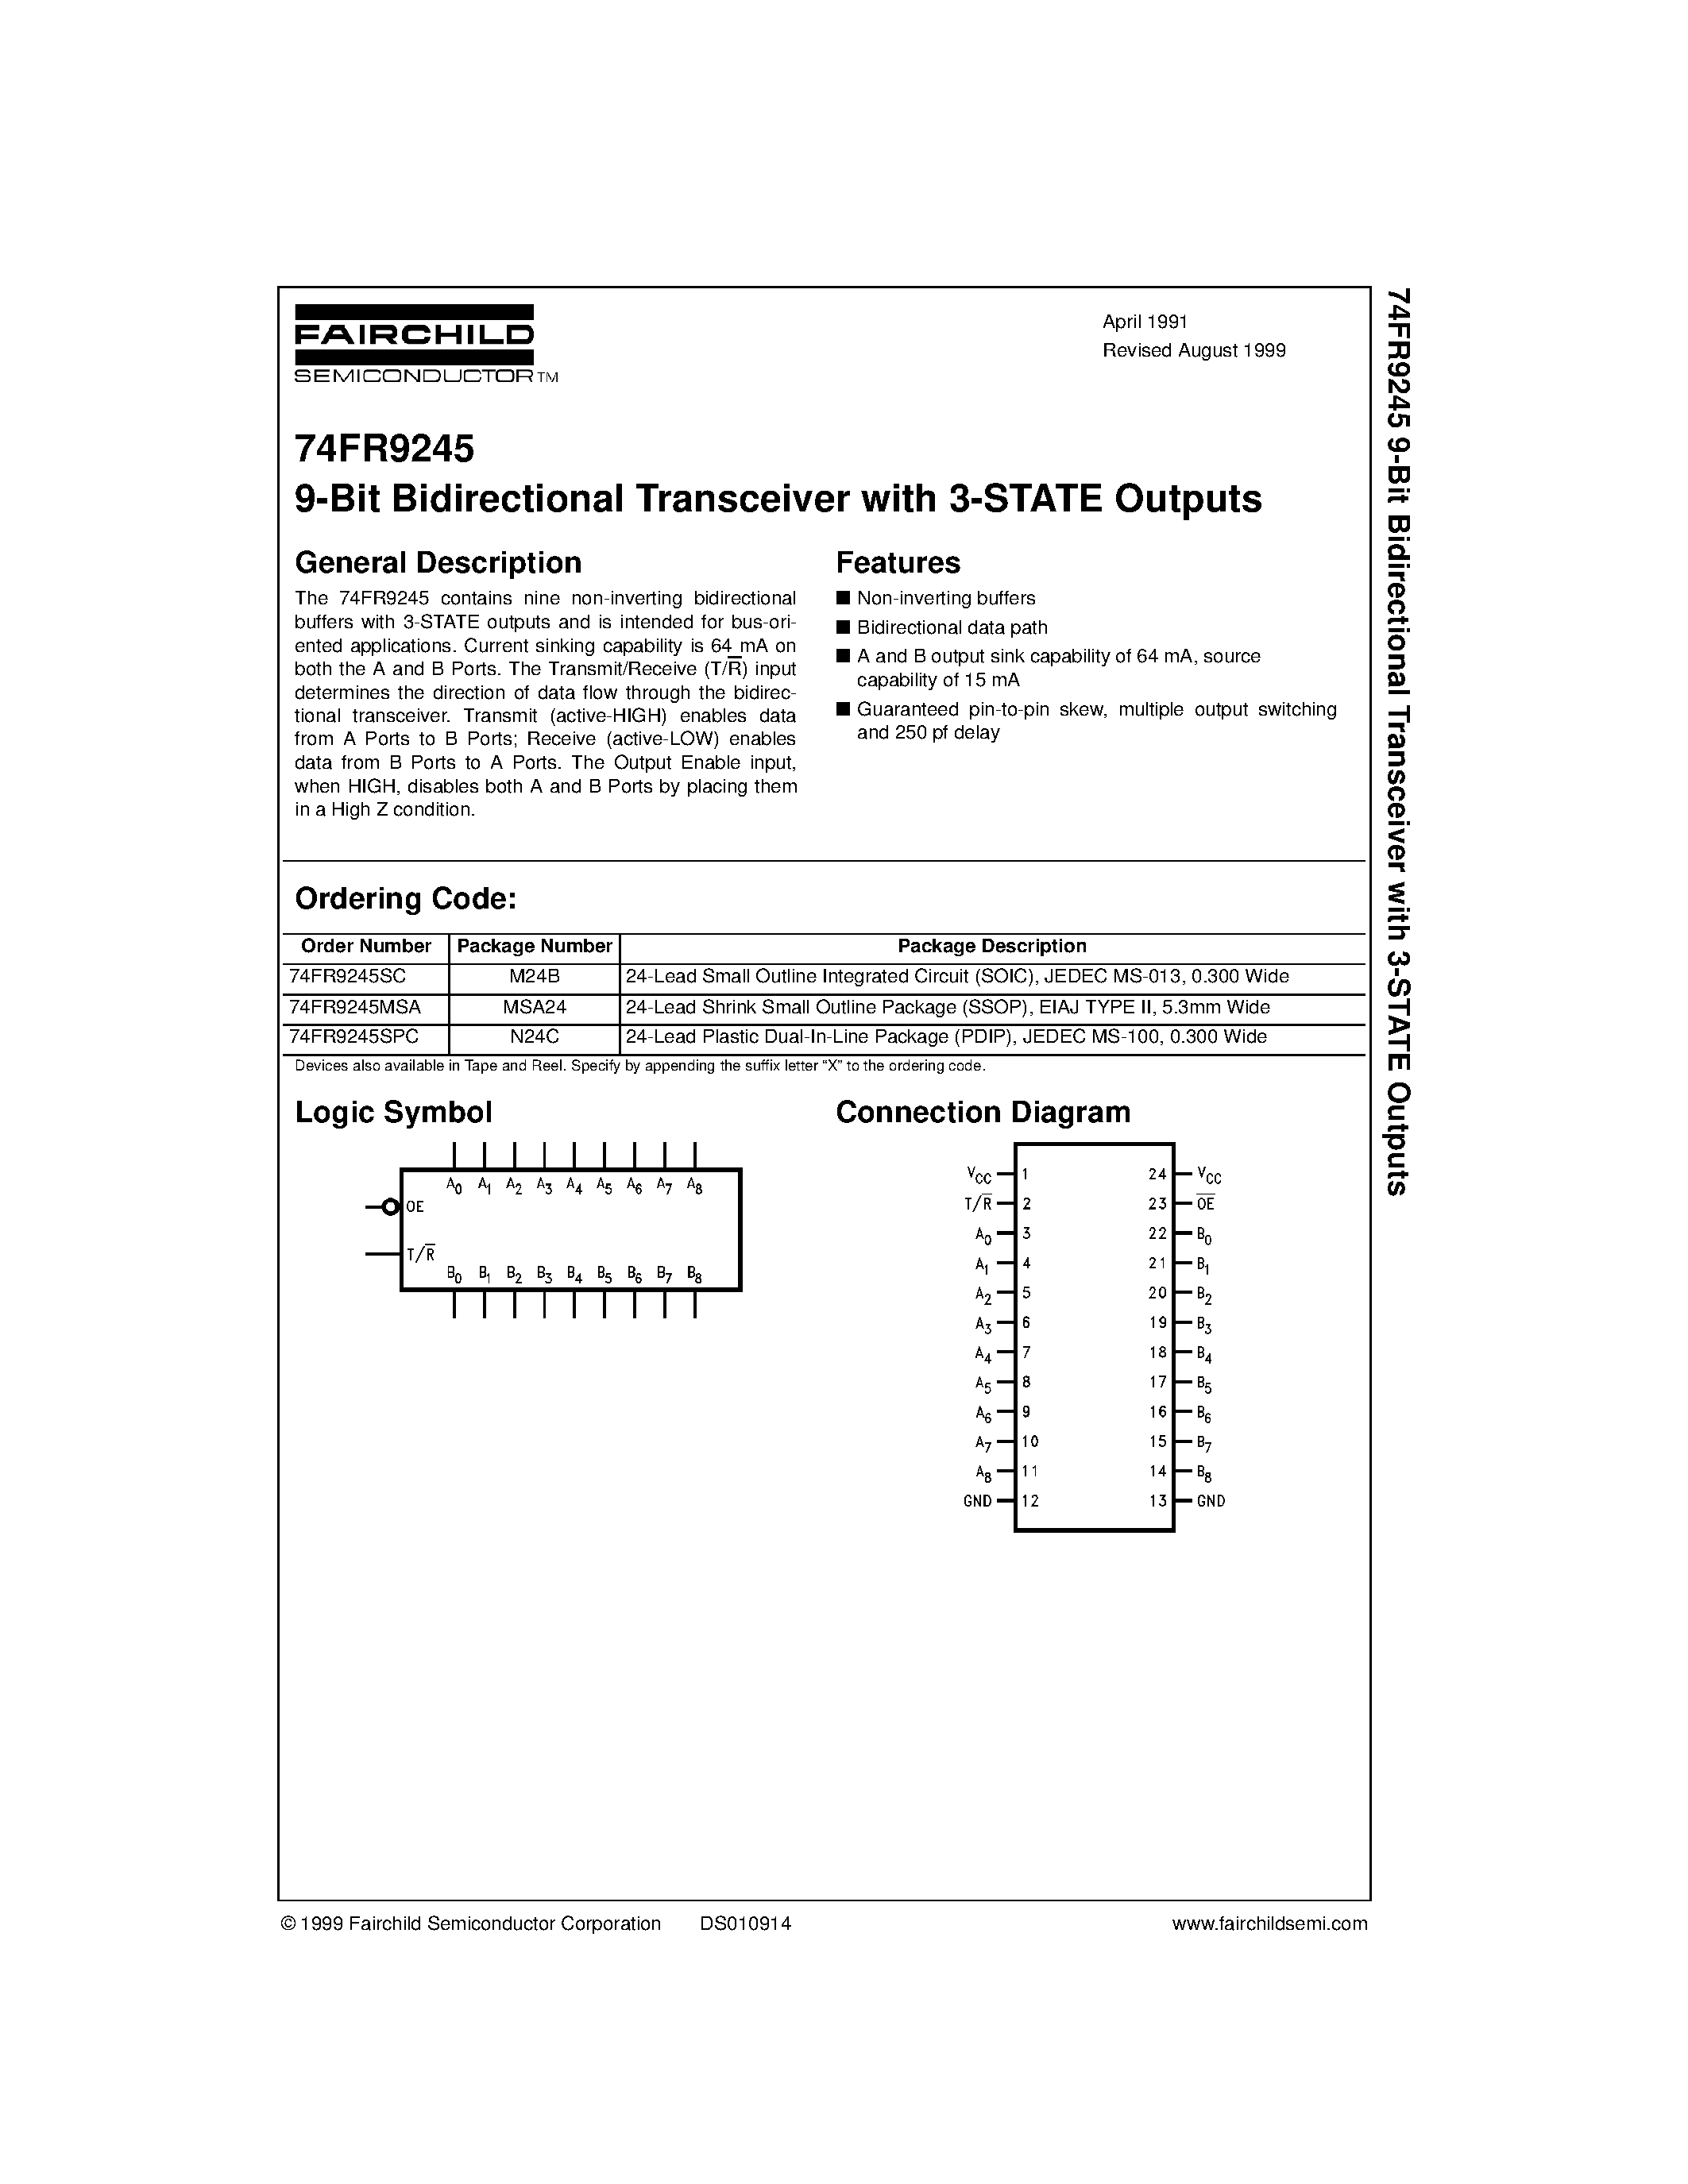 Datasheet 74FR9245 - 9-Bit Bidirectional Transceiver with 3-STATE Outputs page 1